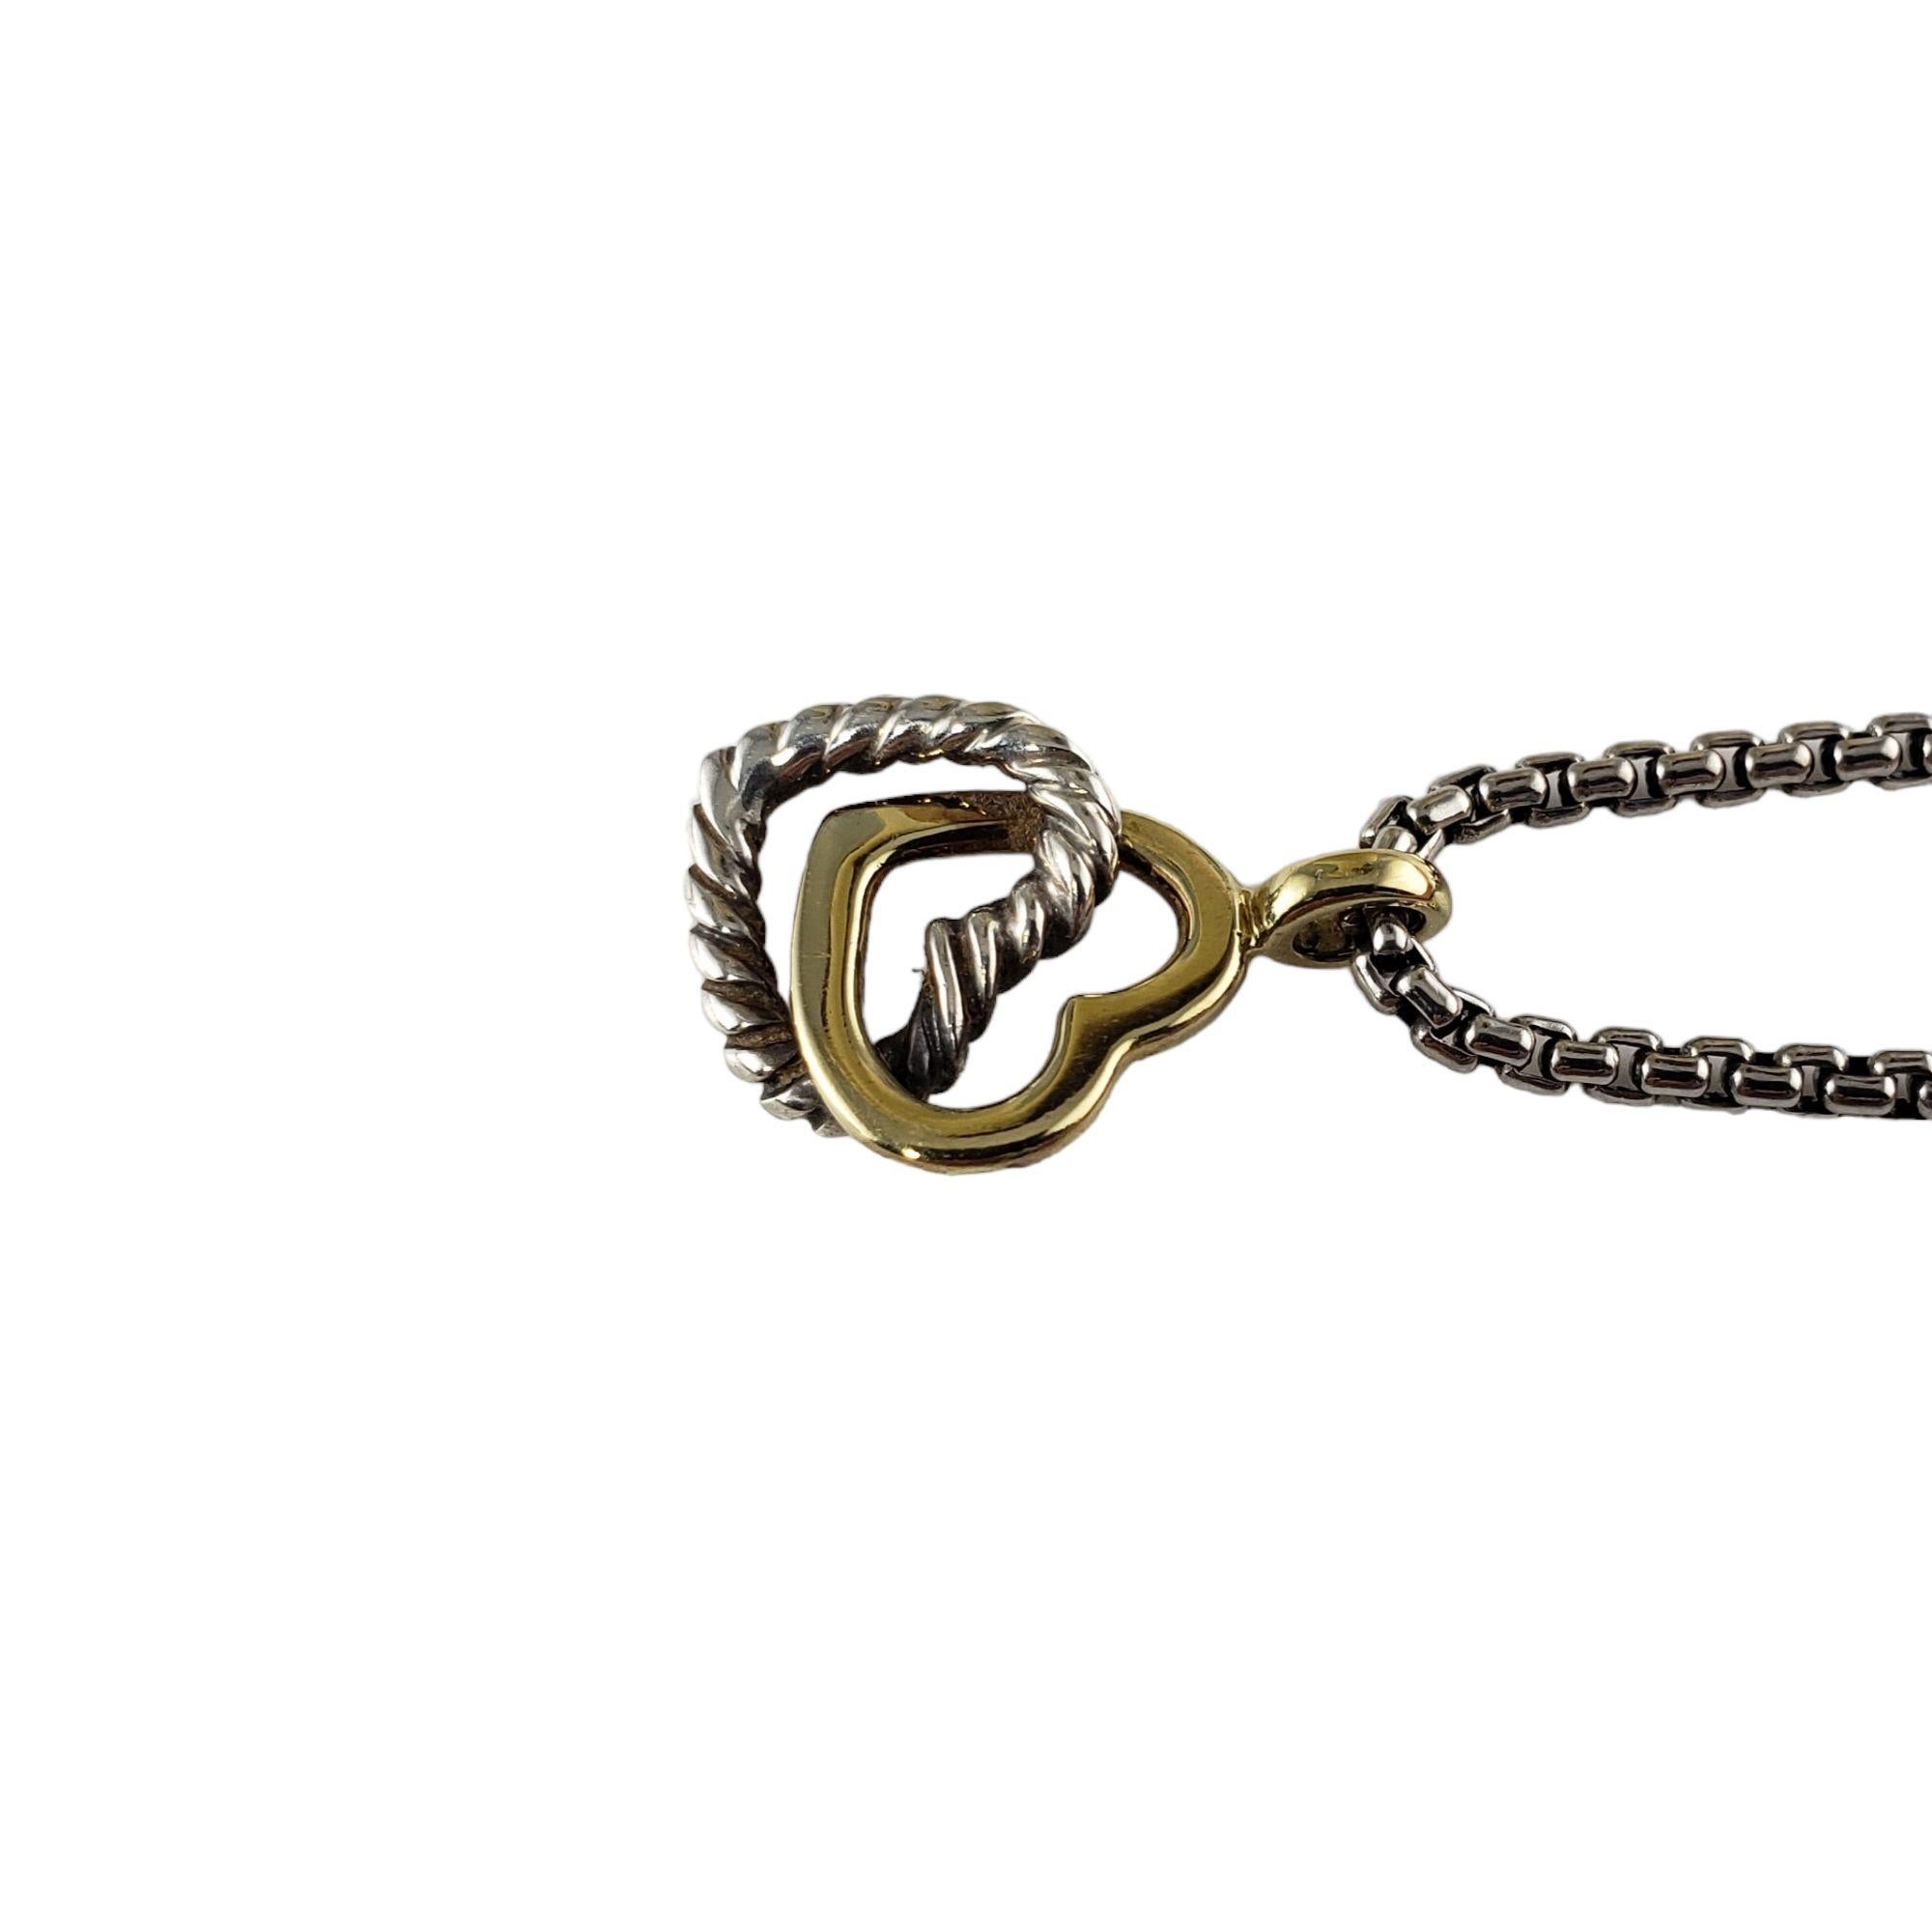 Vintage David Yurman Sterling Silver and 18 Karat Yellow Gold Double Heart Necklace-

This romantic double heart necklace by David Yurman is crafted in beautifully detailed sterling silver and 18K yellow gold.

Size: 16.5 inches (necklace)
13 mm x